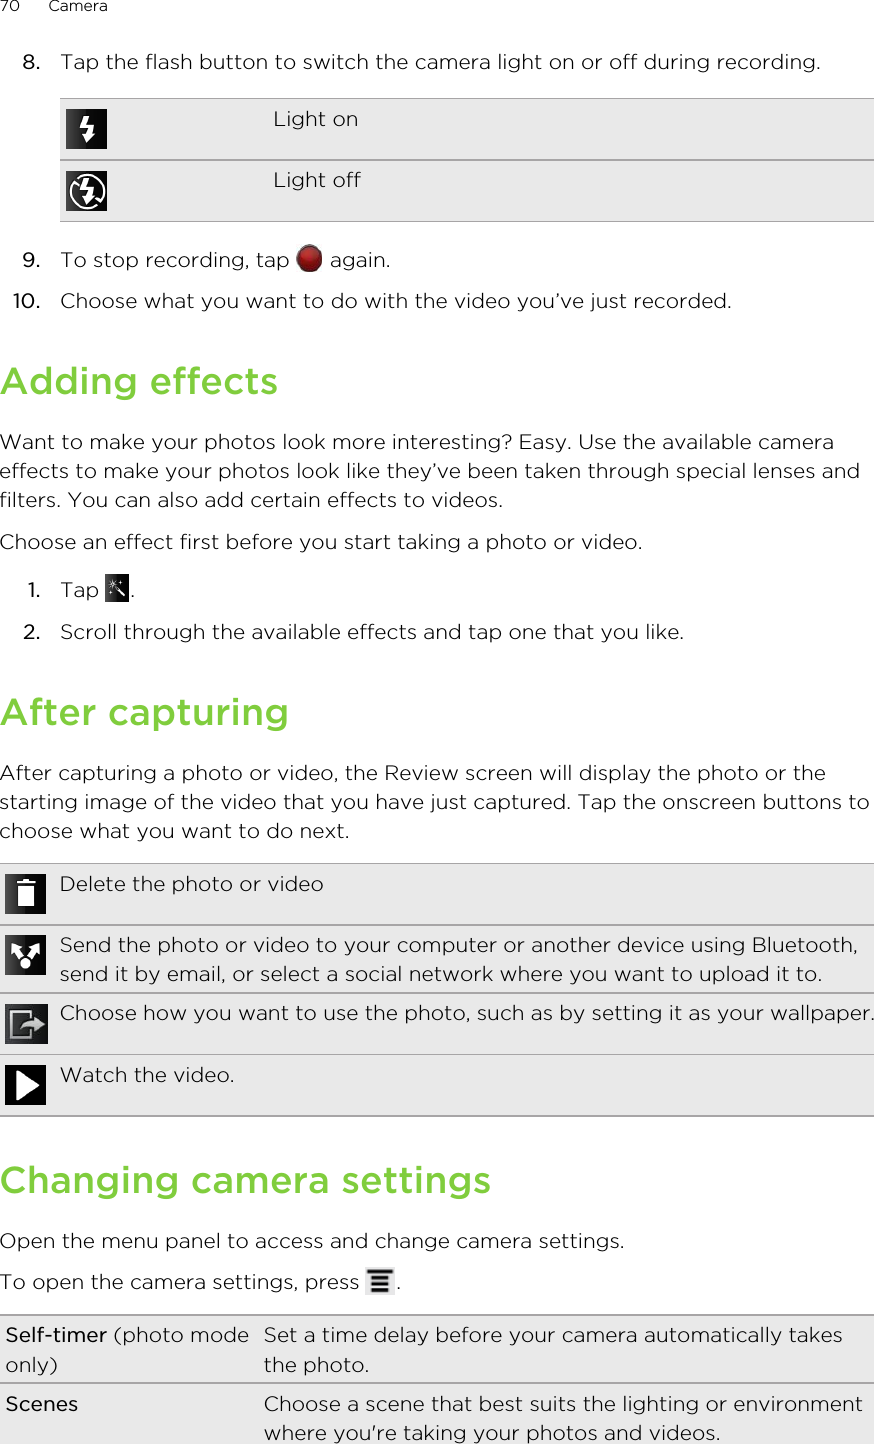 8. Tap the flash button to switch the camera light on or off during recording.Light onLight off9. To stop recording, tap   again.10. Choose what you want to do with the video you’ve just recorded.Adding effectsWant to make your photos look more interesting? Easy. Use the available cameraeffects to make your photos look like they’ve been taken through special lenses andfilters. You can also add certain effects to videos.Choose an effect first before you start taking a photo or video.1. Tap  .2. Scroll through the available effects and tap one that you like.After capturingAfter capturing a photo or video, the Review screen will display the photo or thestarting image of the video that you have just captured. Tap the onscreen buttons tochoose what you want to do next.Delete the photo or videoSend the photo or video to your computer or another device using Bluetooth,send it by email, or select a social network where you want to upload it to.Choose how you want to use the photo, such as by setting it as your wallpaper.Watch the video.Changing camera settingsOpen the menu panel to access and change camera settings.To open the camera settings, press  .Self-timer (photo modeonly)Set a time delay before your camera automatically takesthe photo.Scenes Choose a scene that best suits the lighting or environmentwhere you&apos;re taking your photos and videos.70 Camera